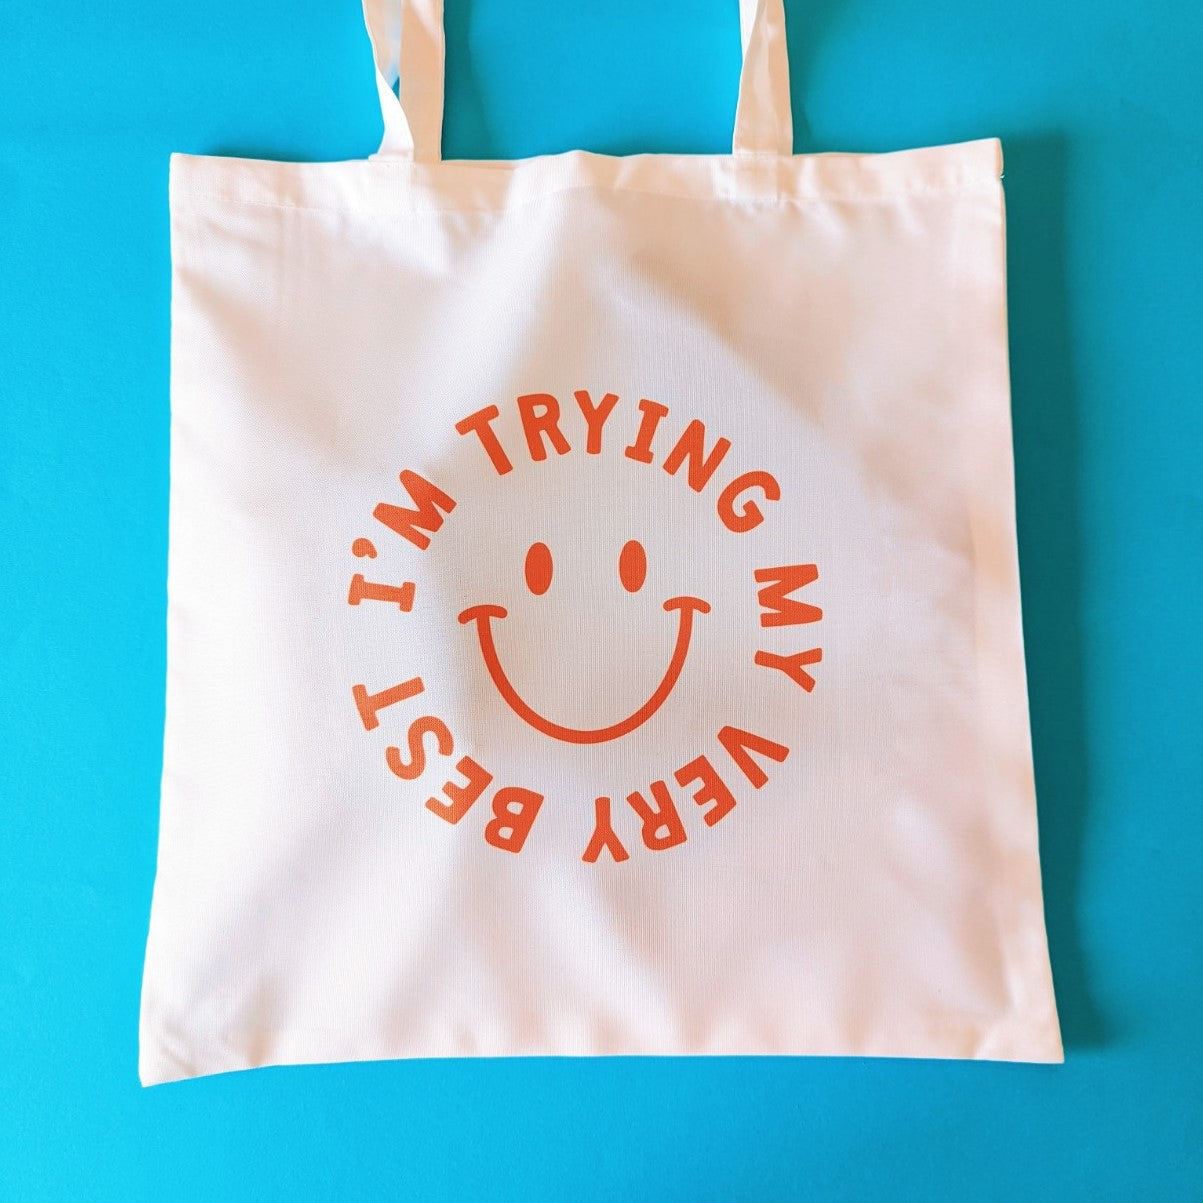 I'm Trying My Very Best Tote Bag